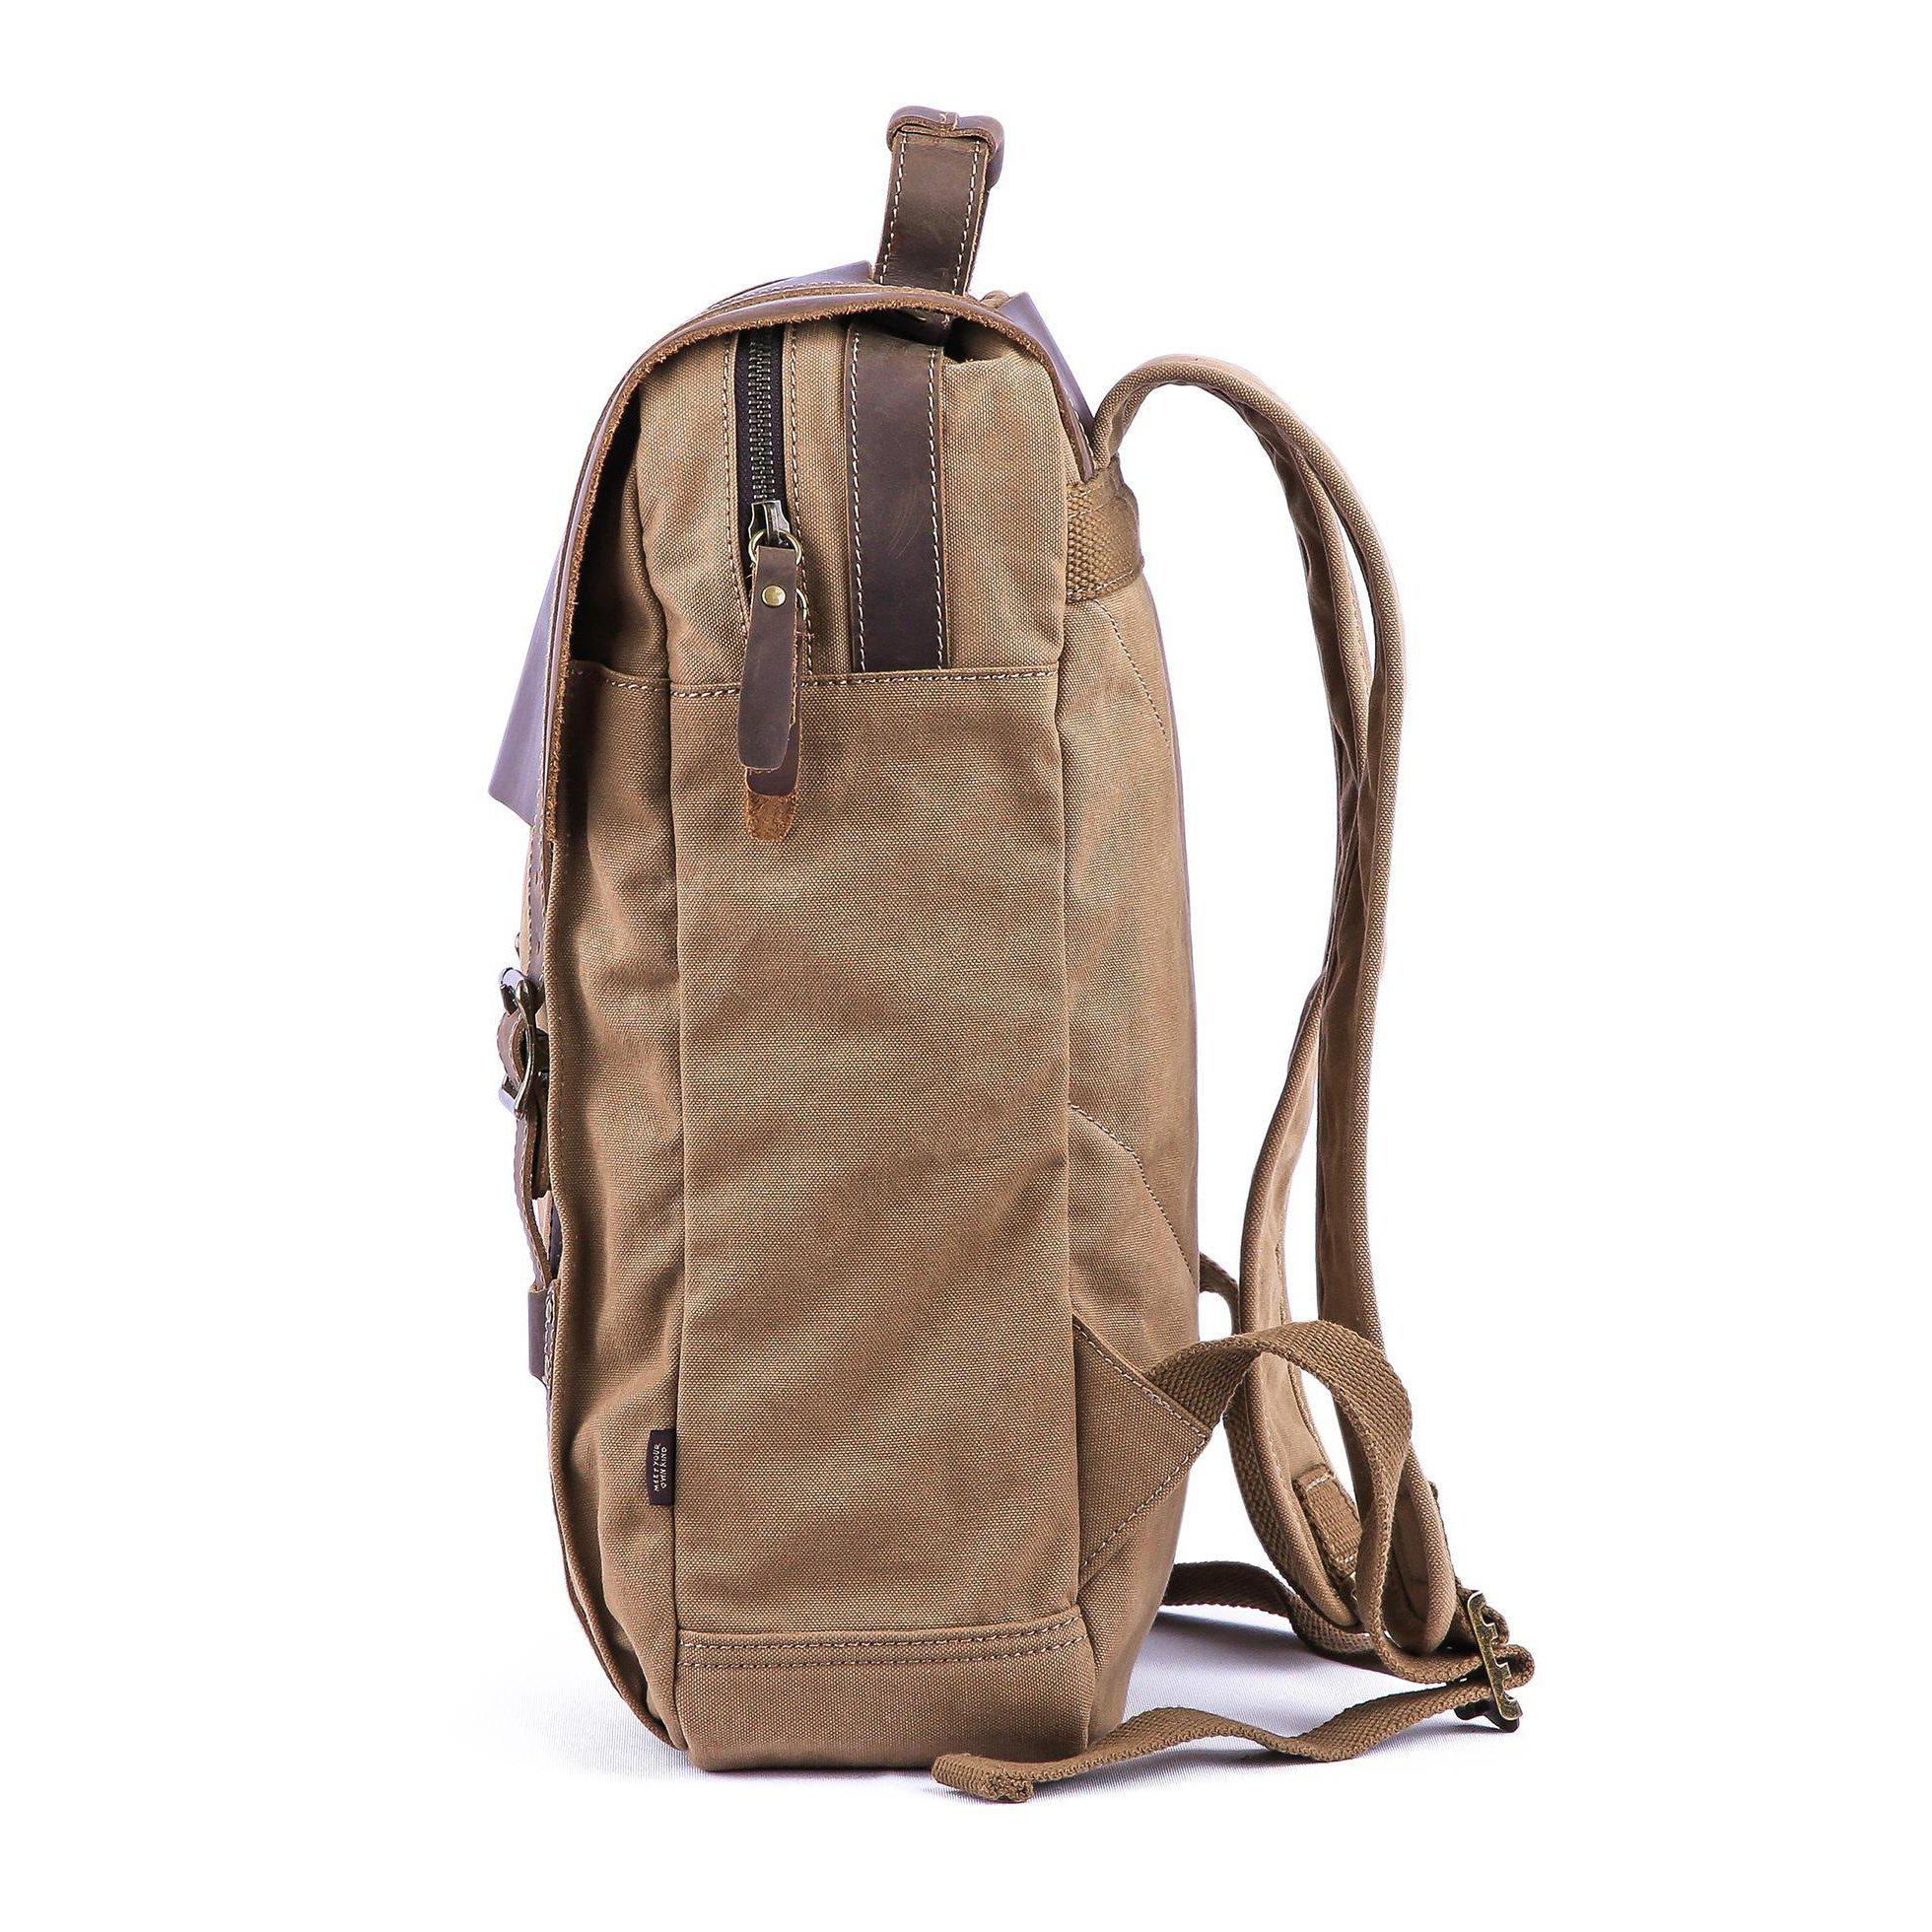 Leather-Canvas Backpack Hiking Backpack. Camping Backpack